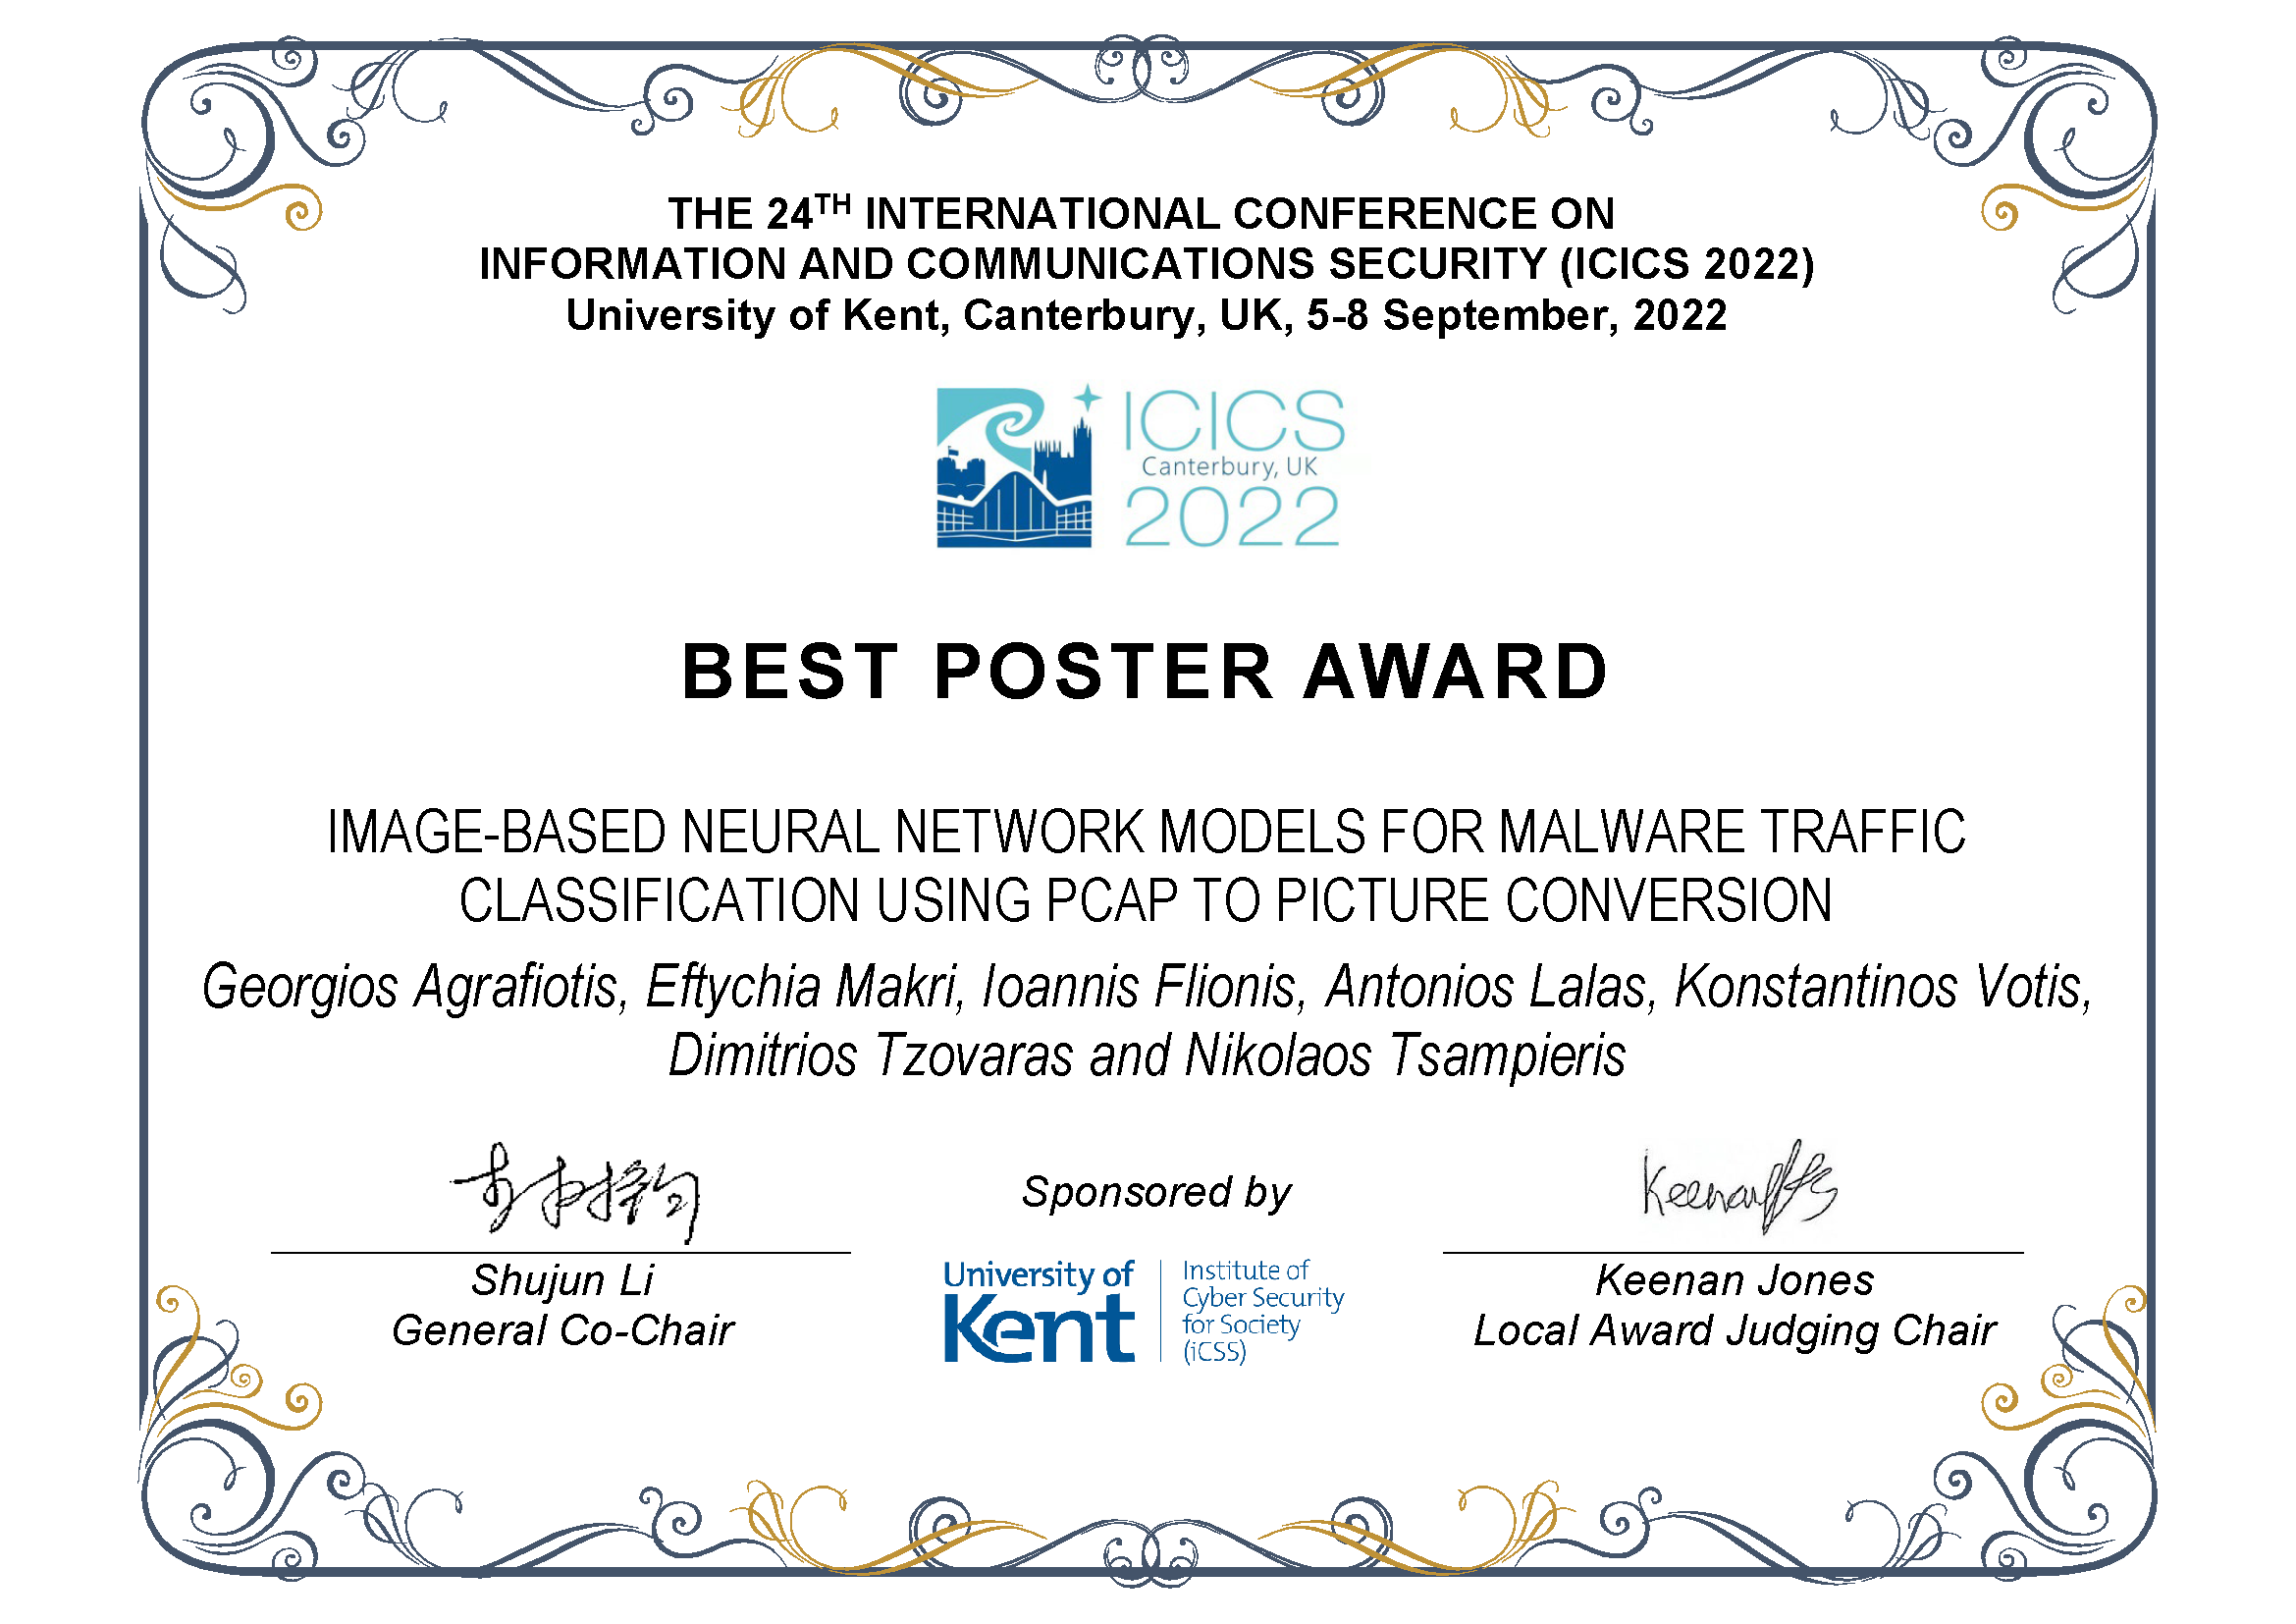 Certificate for ICICS 2022 Best Poster Award